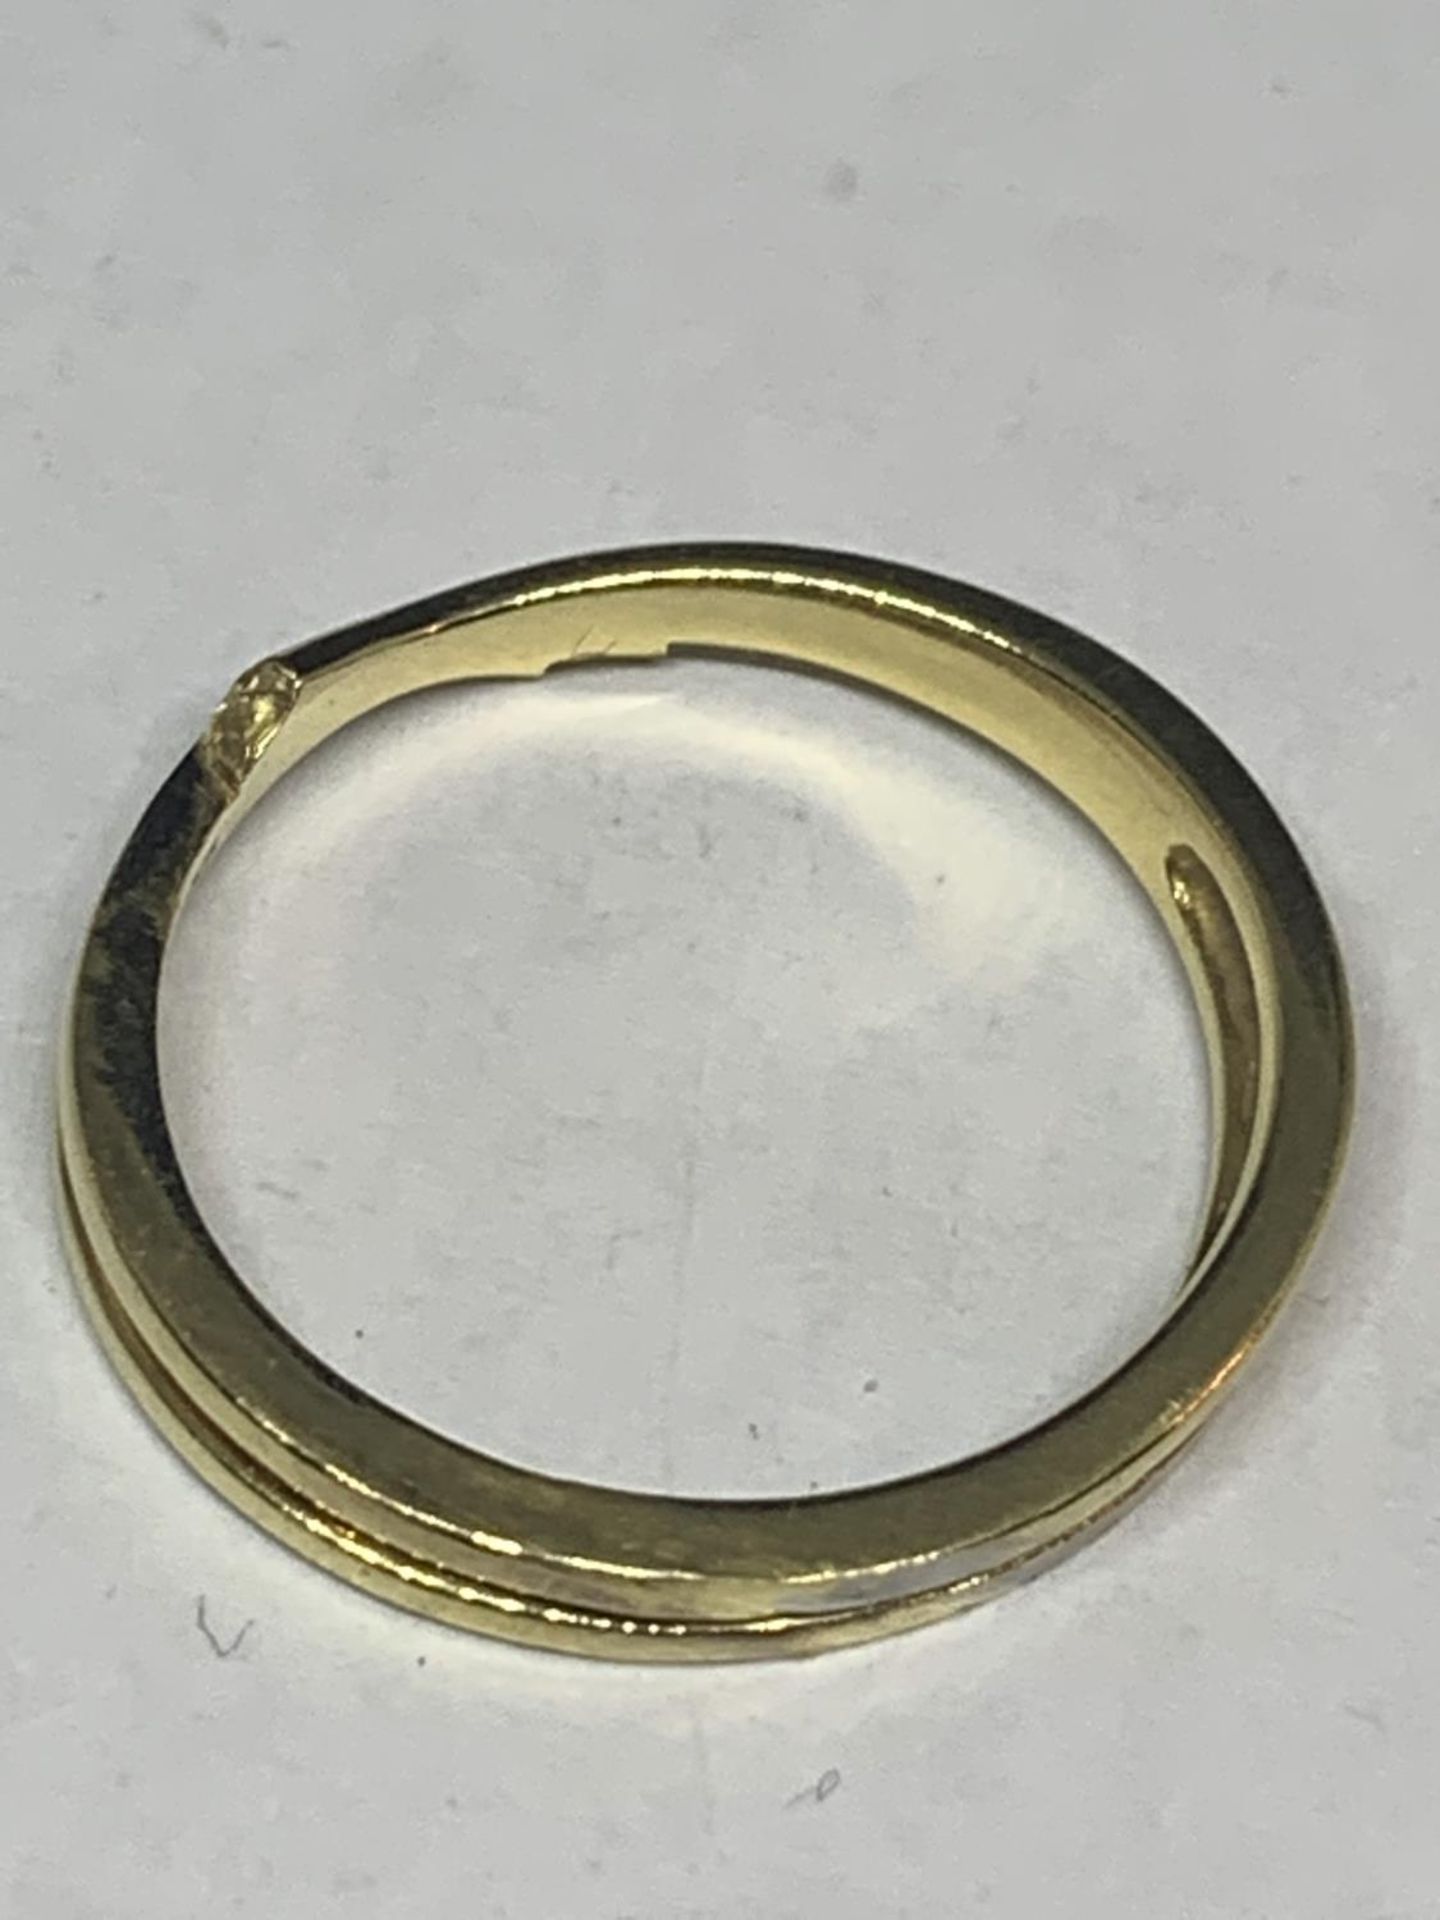 AN 18 CARAT GOLD RING WEIGHT 2.9G - Image 3 of 3